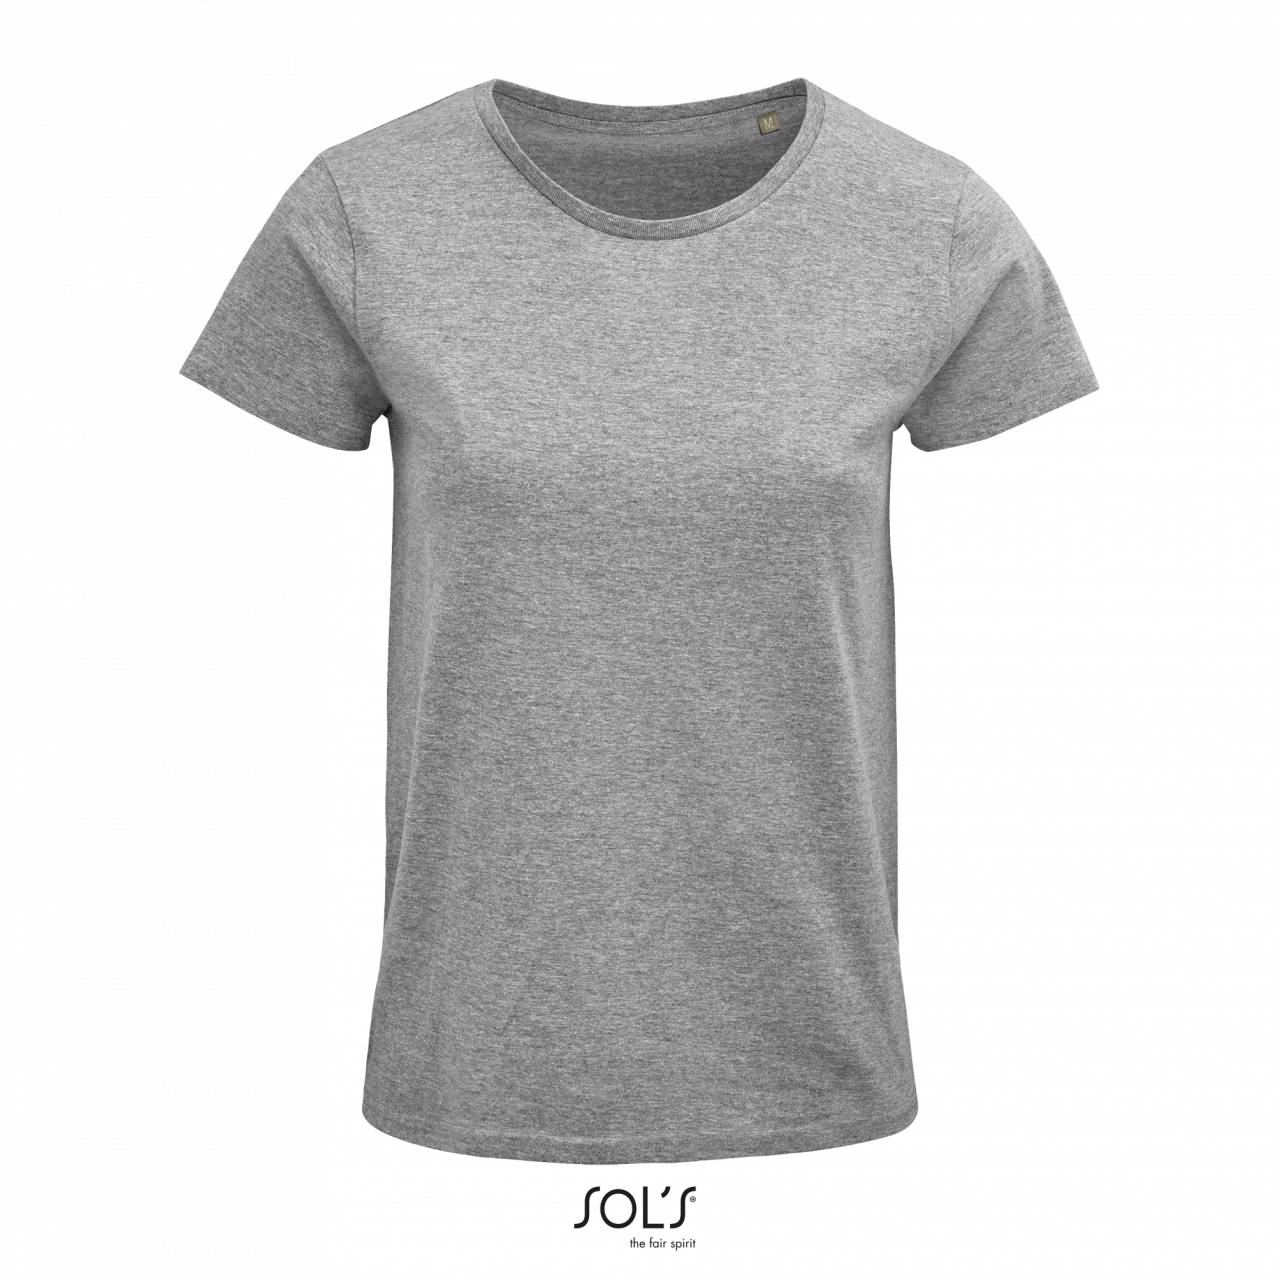 Sol's Crusader Women - Round-neck Fitted Jersey T-shirt - Sol's Crusader Women - Round-neck Fitted Jersey T-shirt - Sport Grey